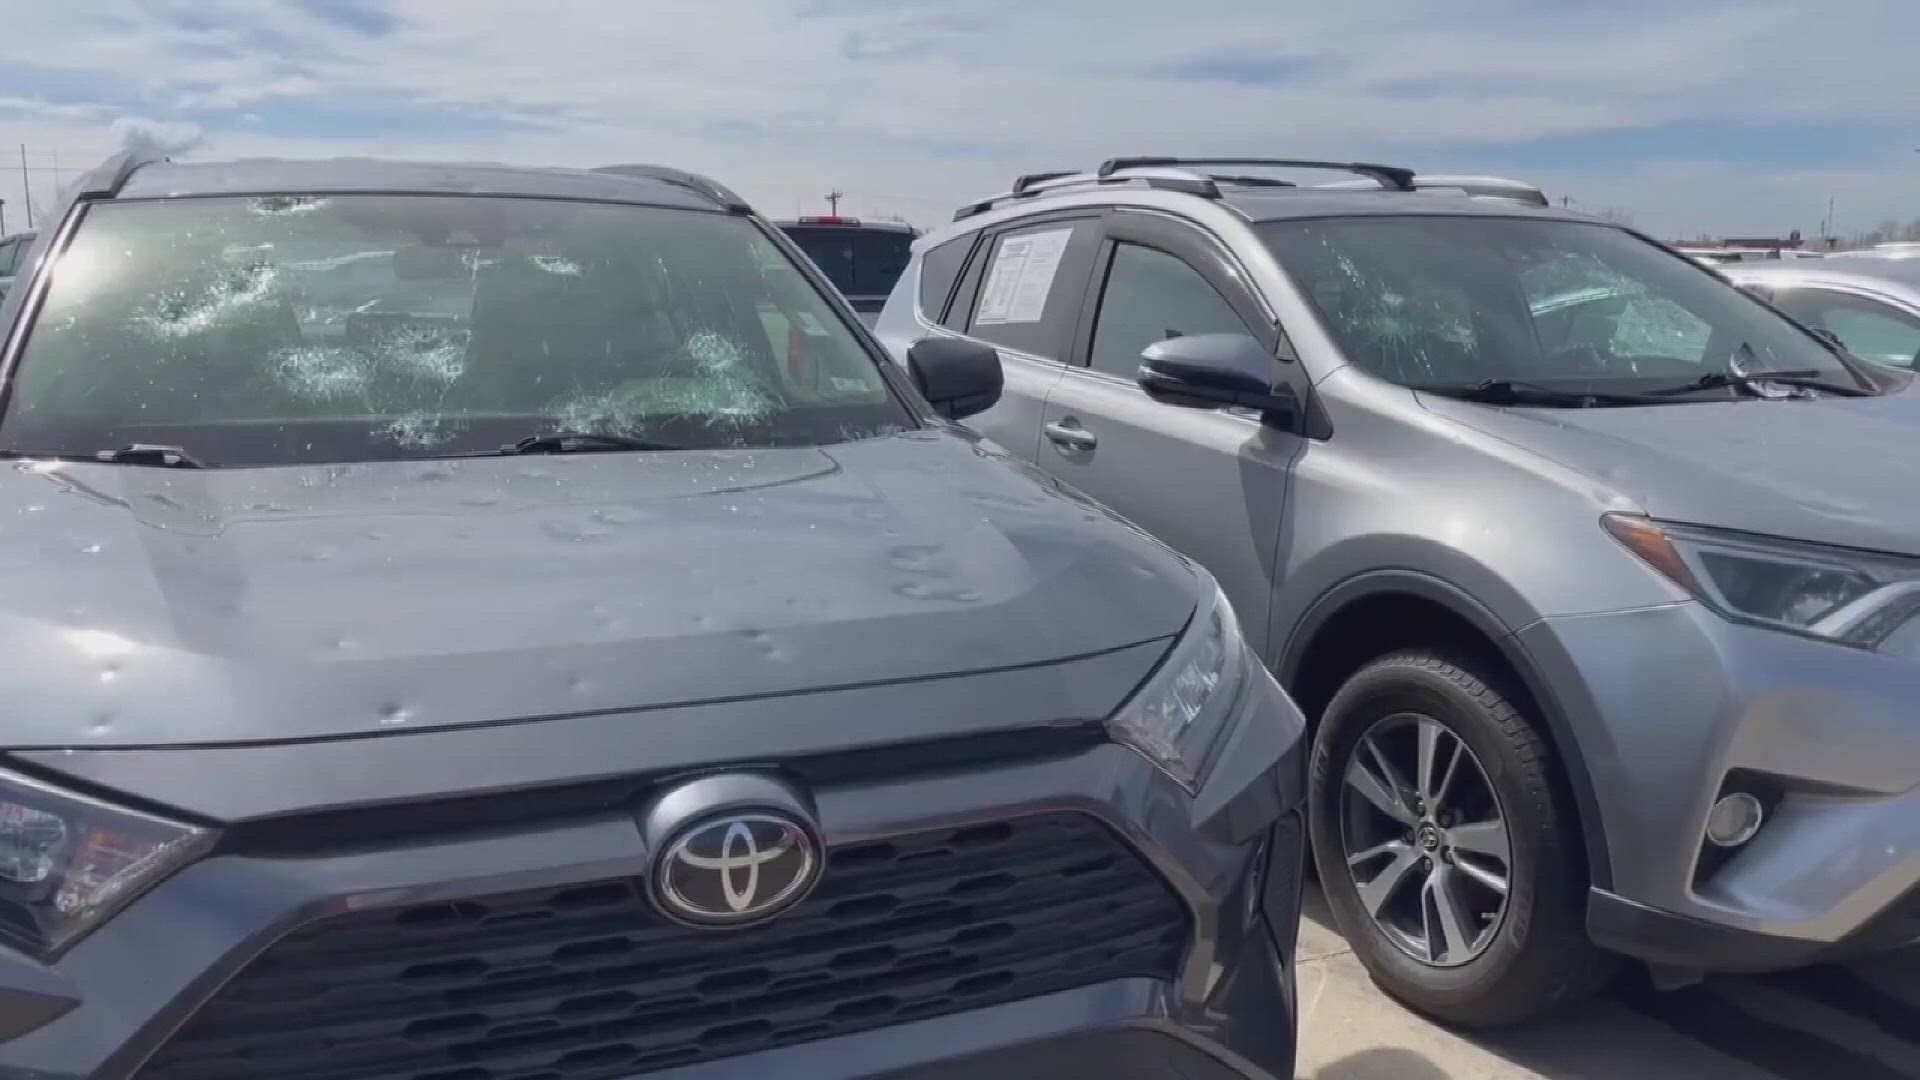 More than 100 cars and 150 RVs were damaged at the car dealership. Residents in O'Fallon, Missouri, also had damage to their personal vehicles and homes.